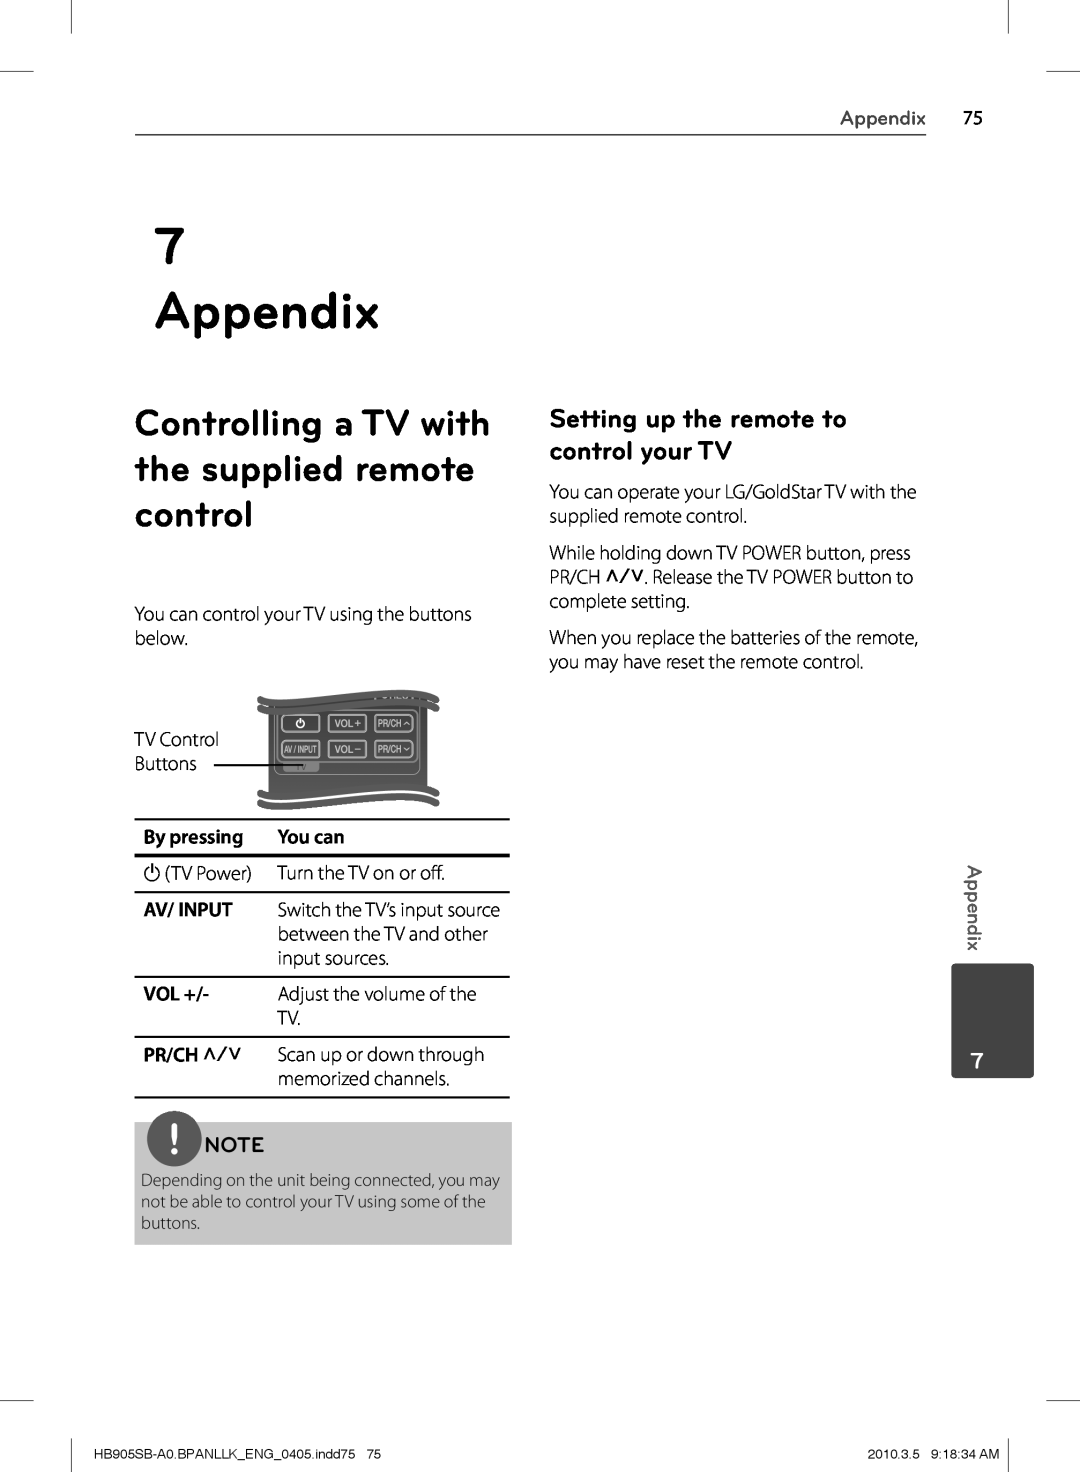 LG Electronics HB905SB Appendix, Controlling a TV with the supplied remote control, By pressing, You can, Av/ Input, Vol + 